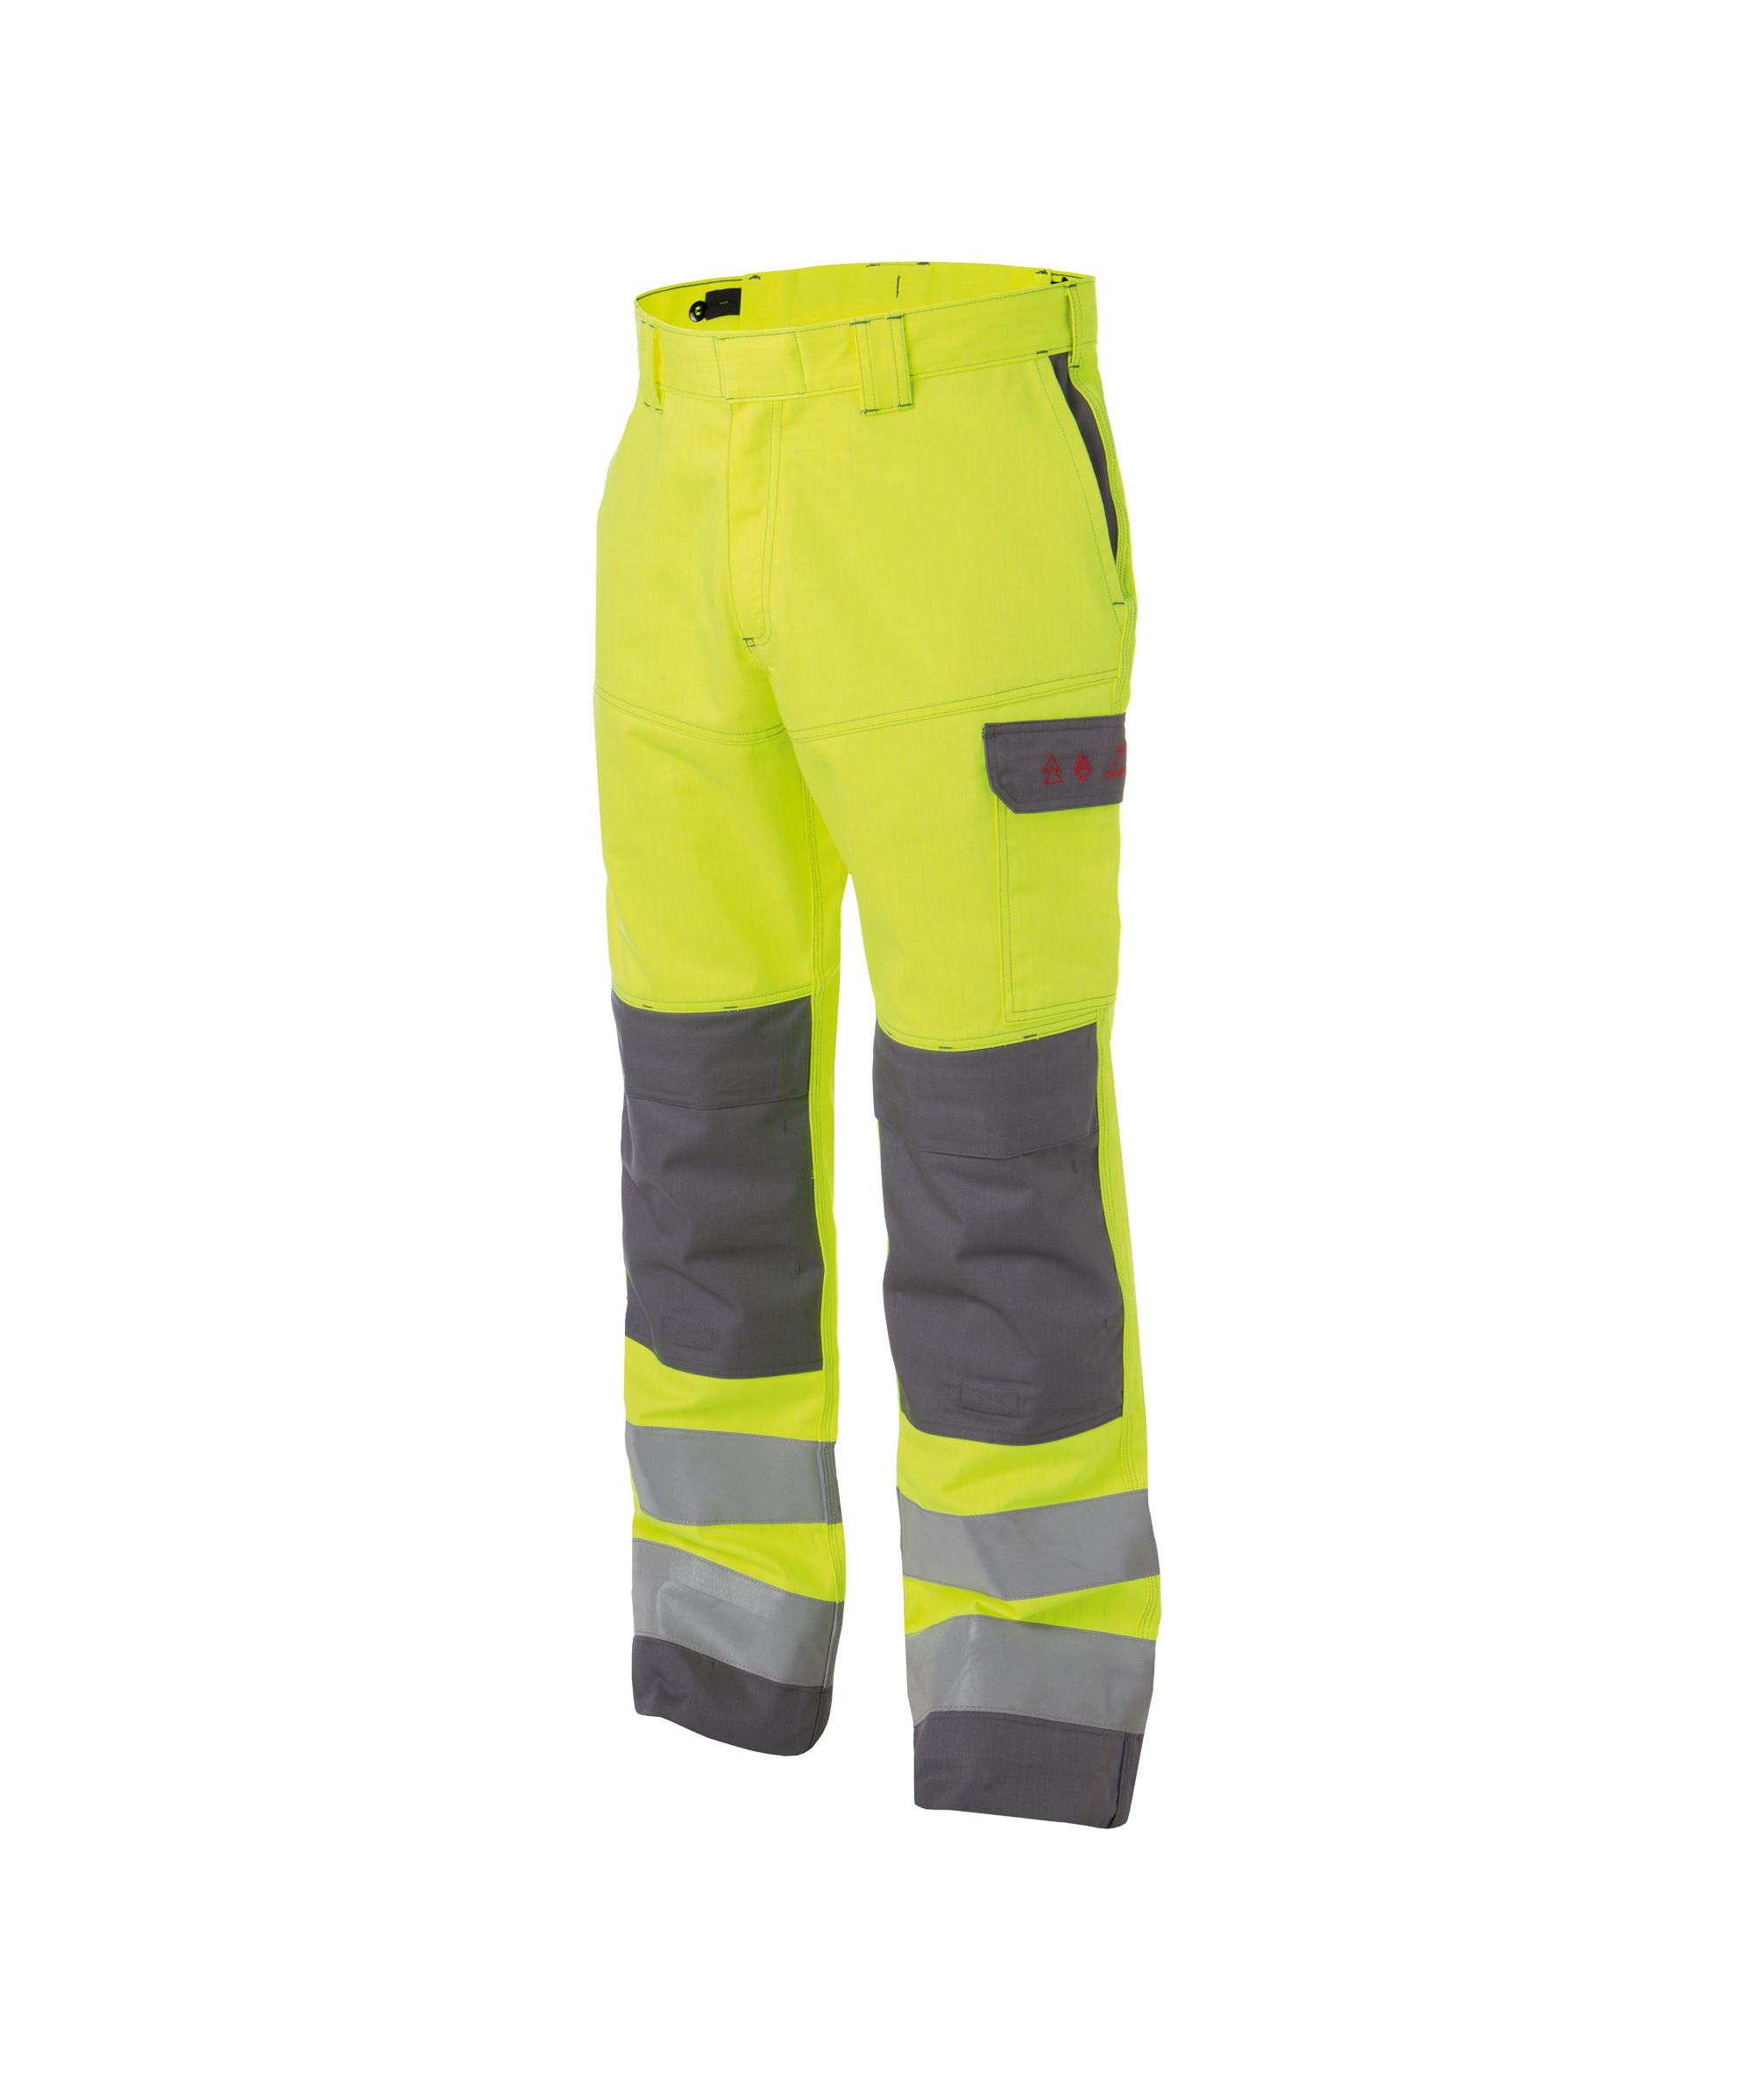 manchester_two-tone-multinorm-high-visibility-work-trousers-with-knee-pockets_fluo-yellow-graphite-grey_side.jpg